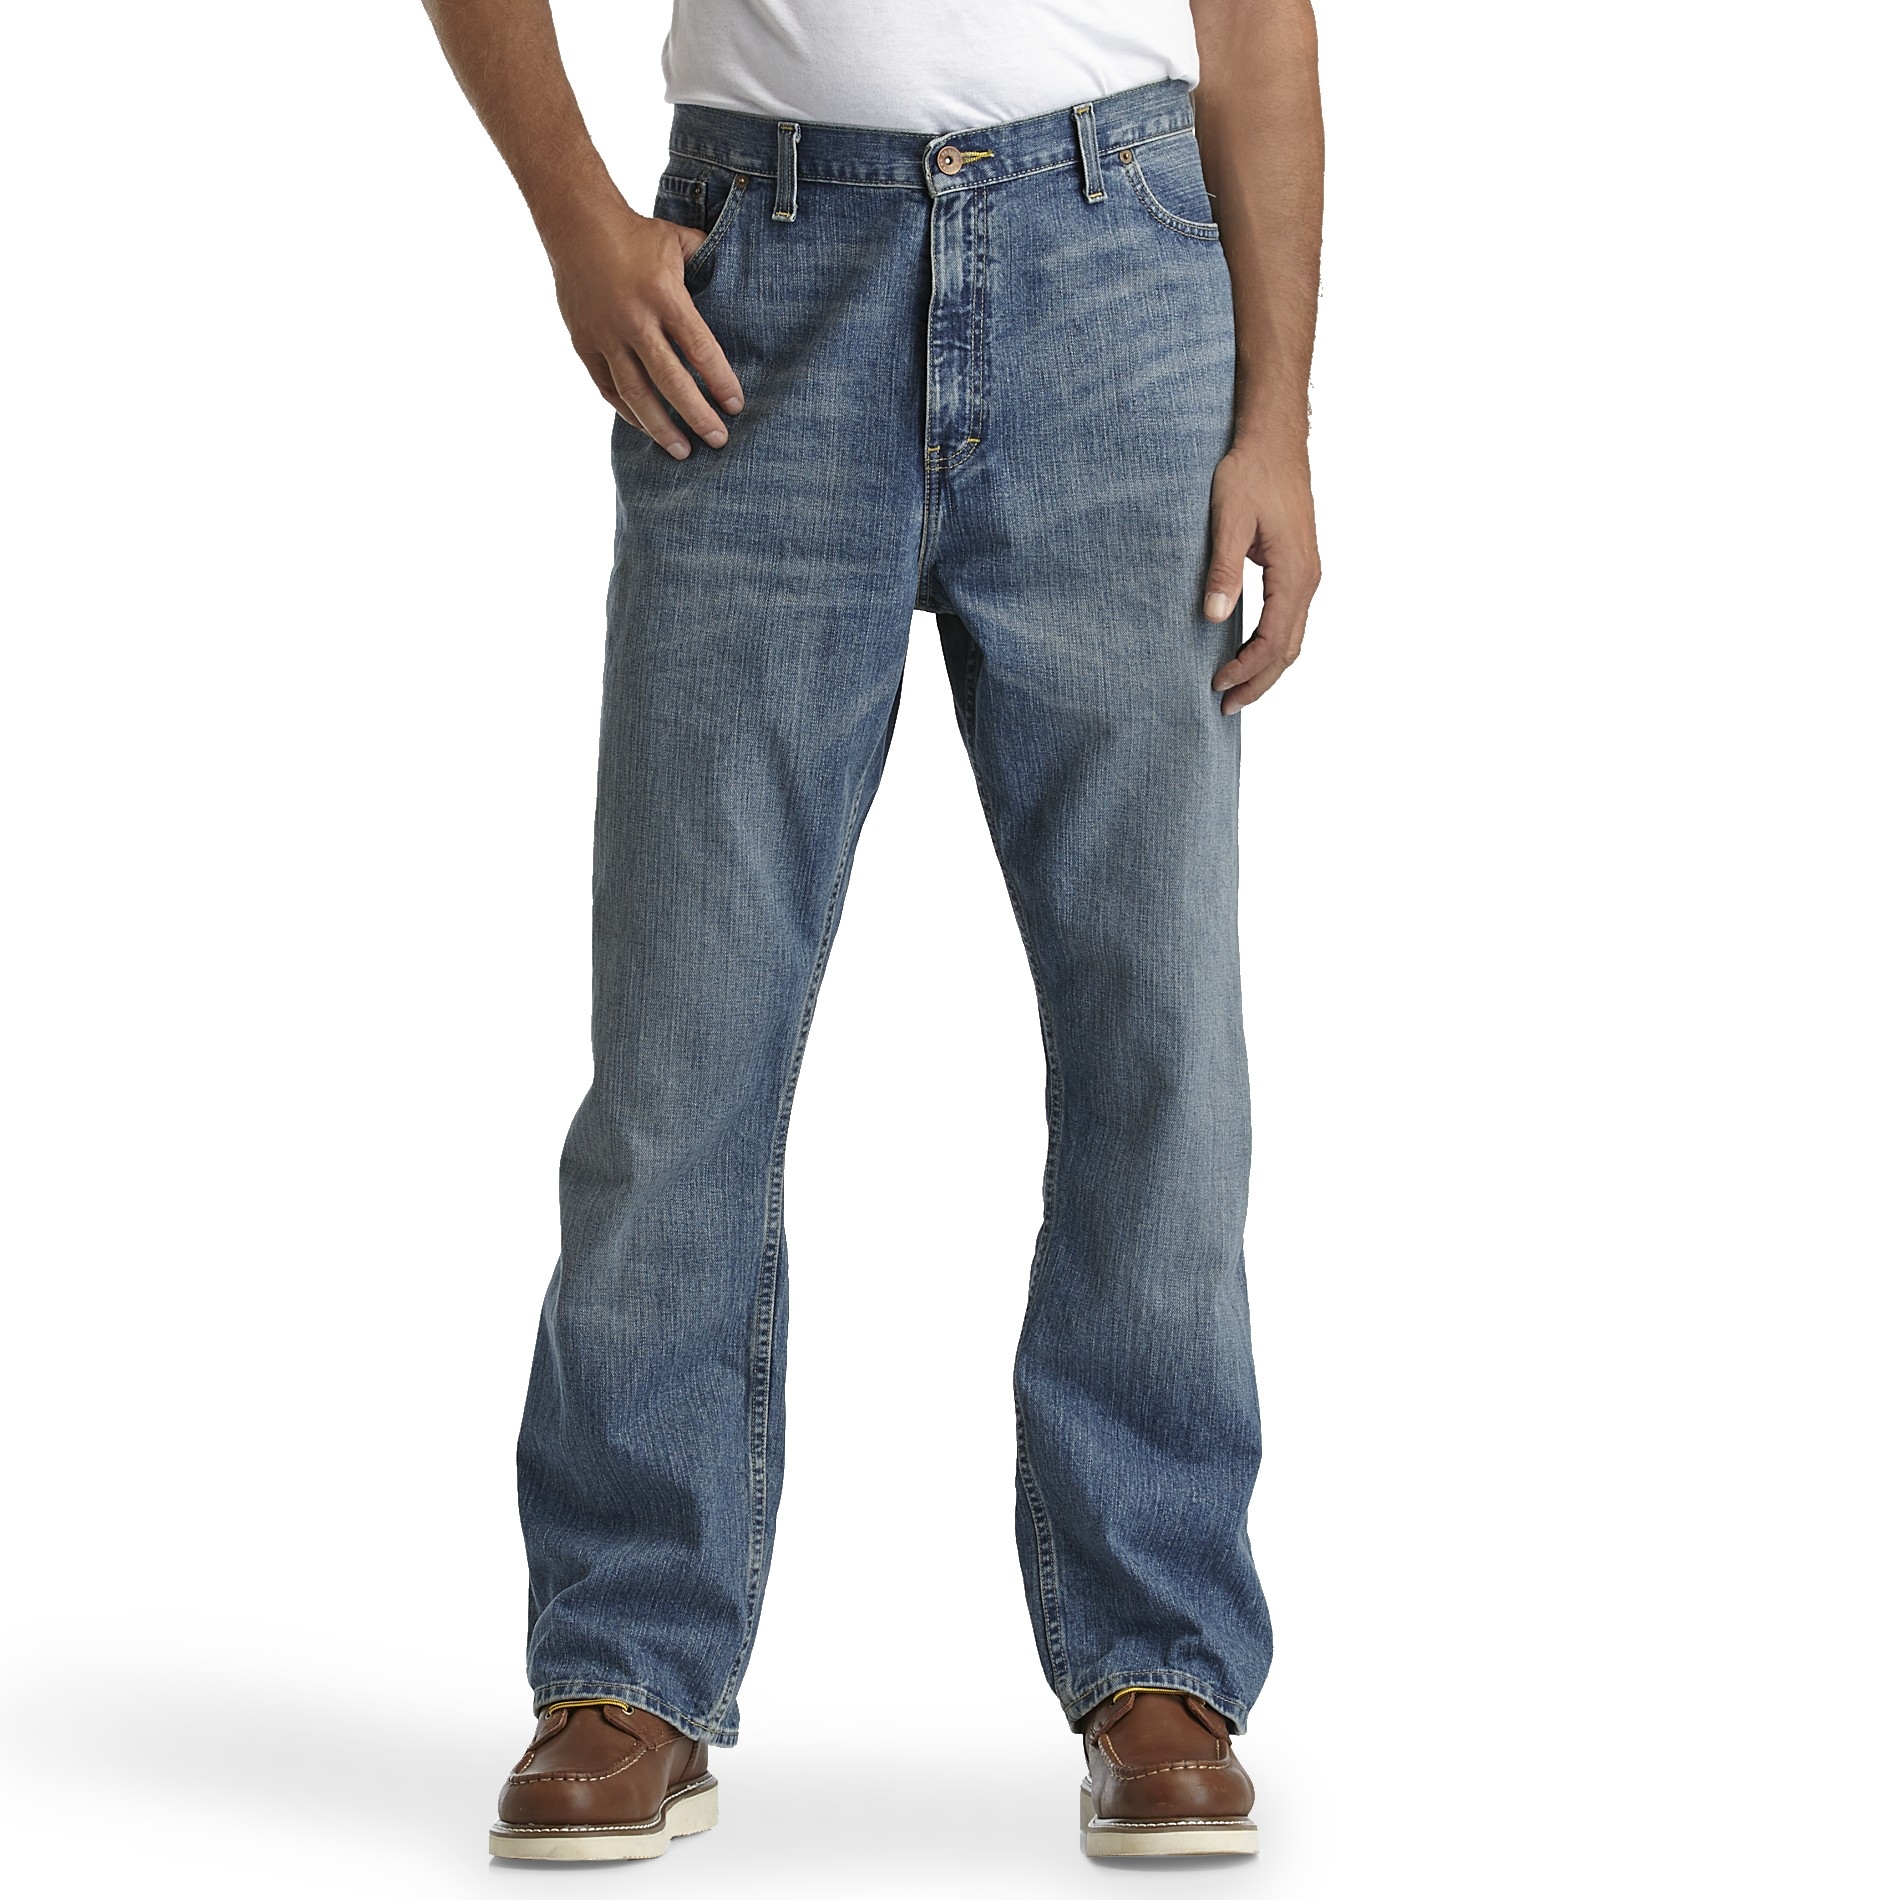 Route 66 Men's Big & Tall Relaxed Jeans